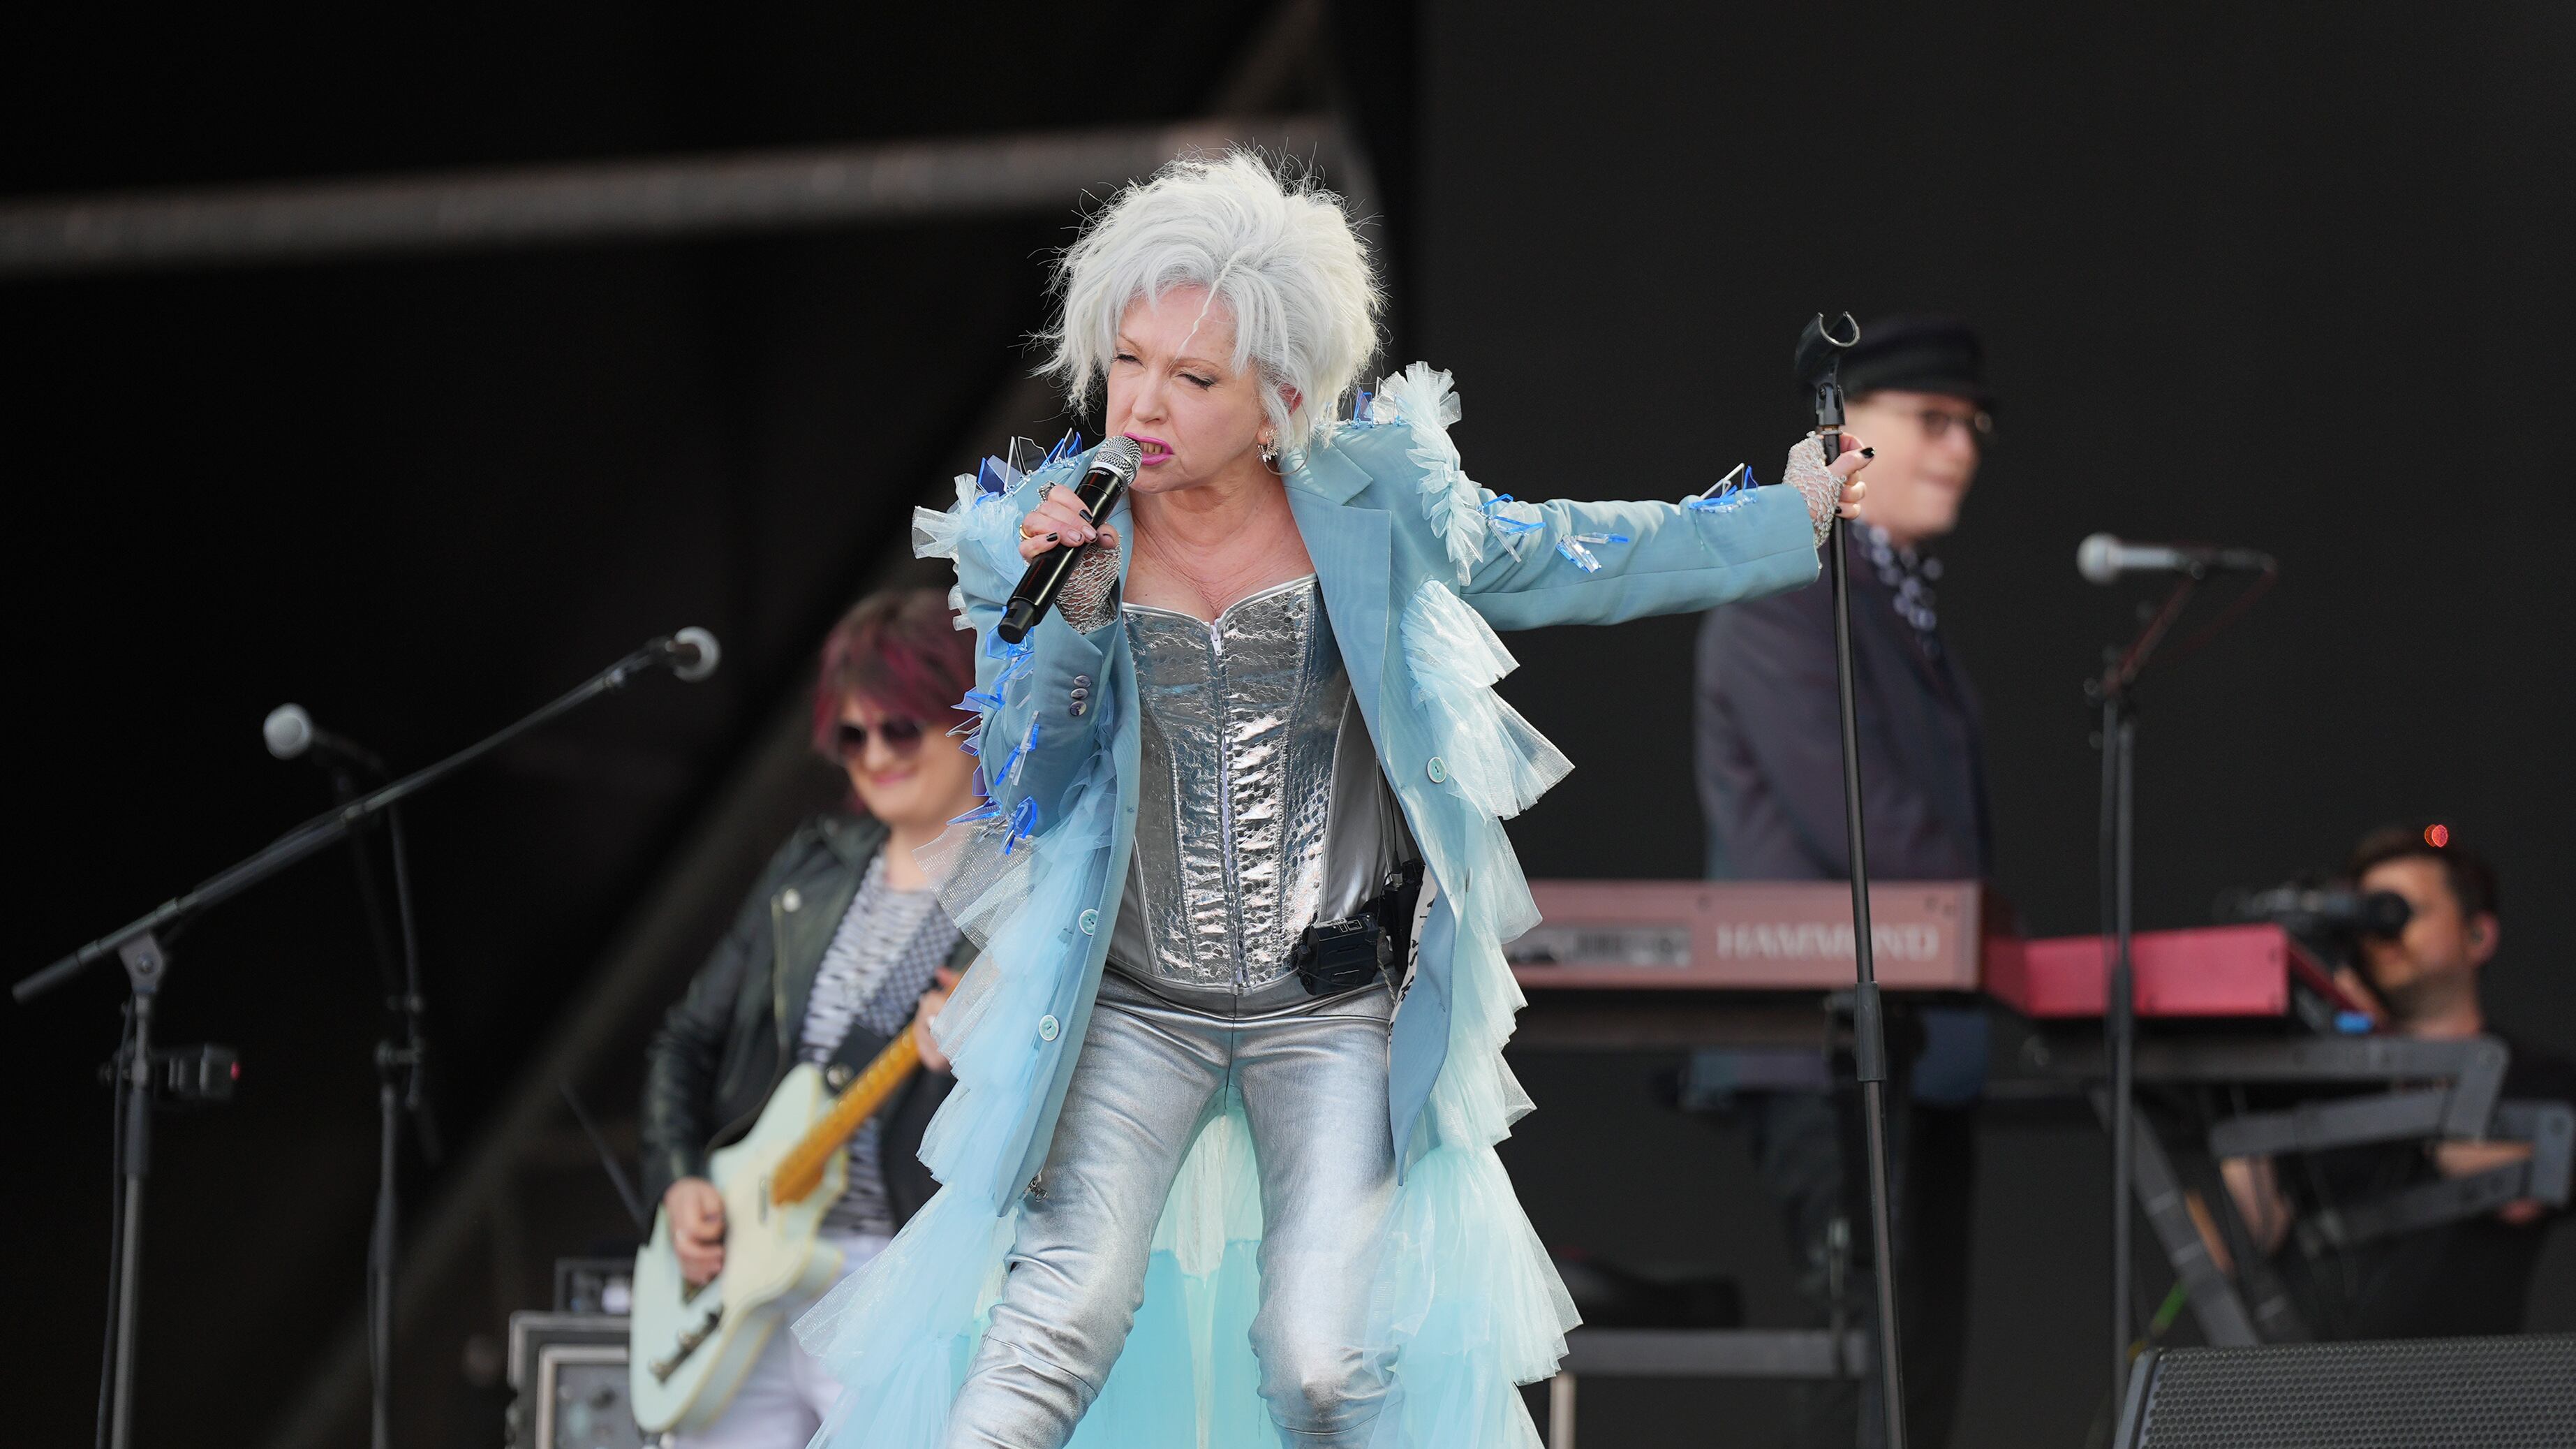 Cyndi Lauper performed on the Pyramid Stage, at the Glastonbury Festival at Worthy Farm in Somerset